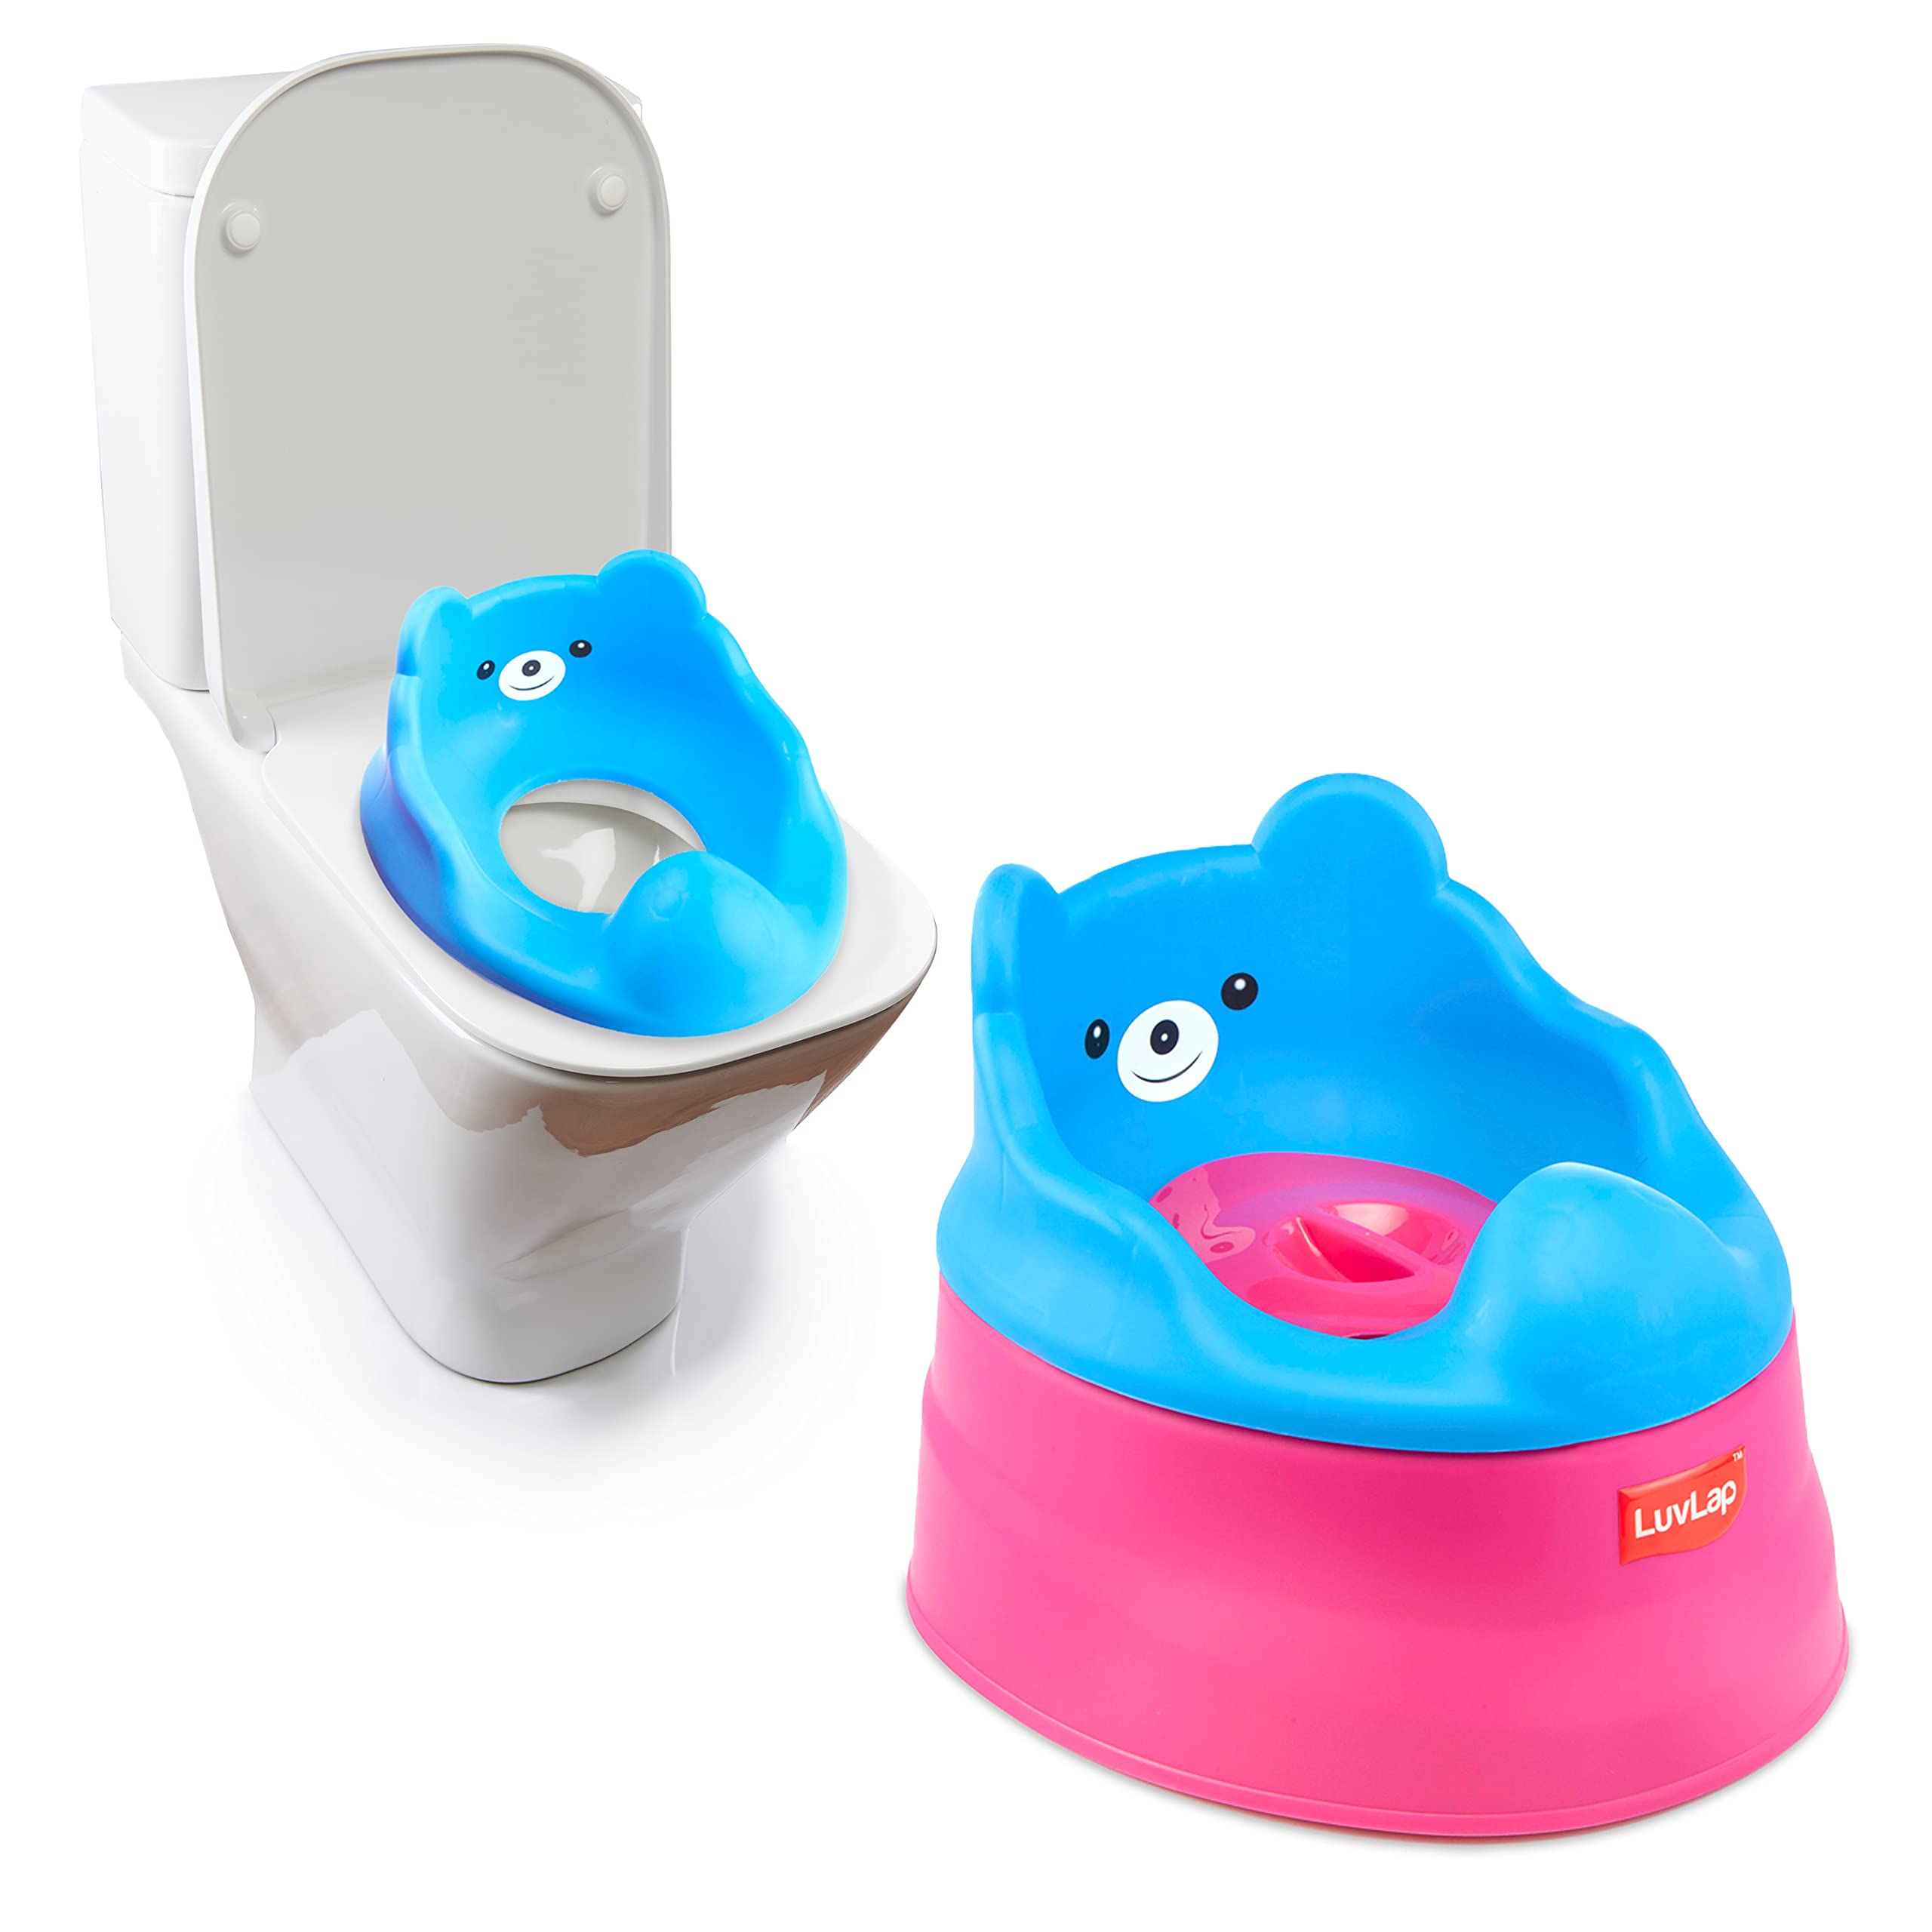 potty trainer for baby boy Baby potty set trainer -green-baby products online india, kids online